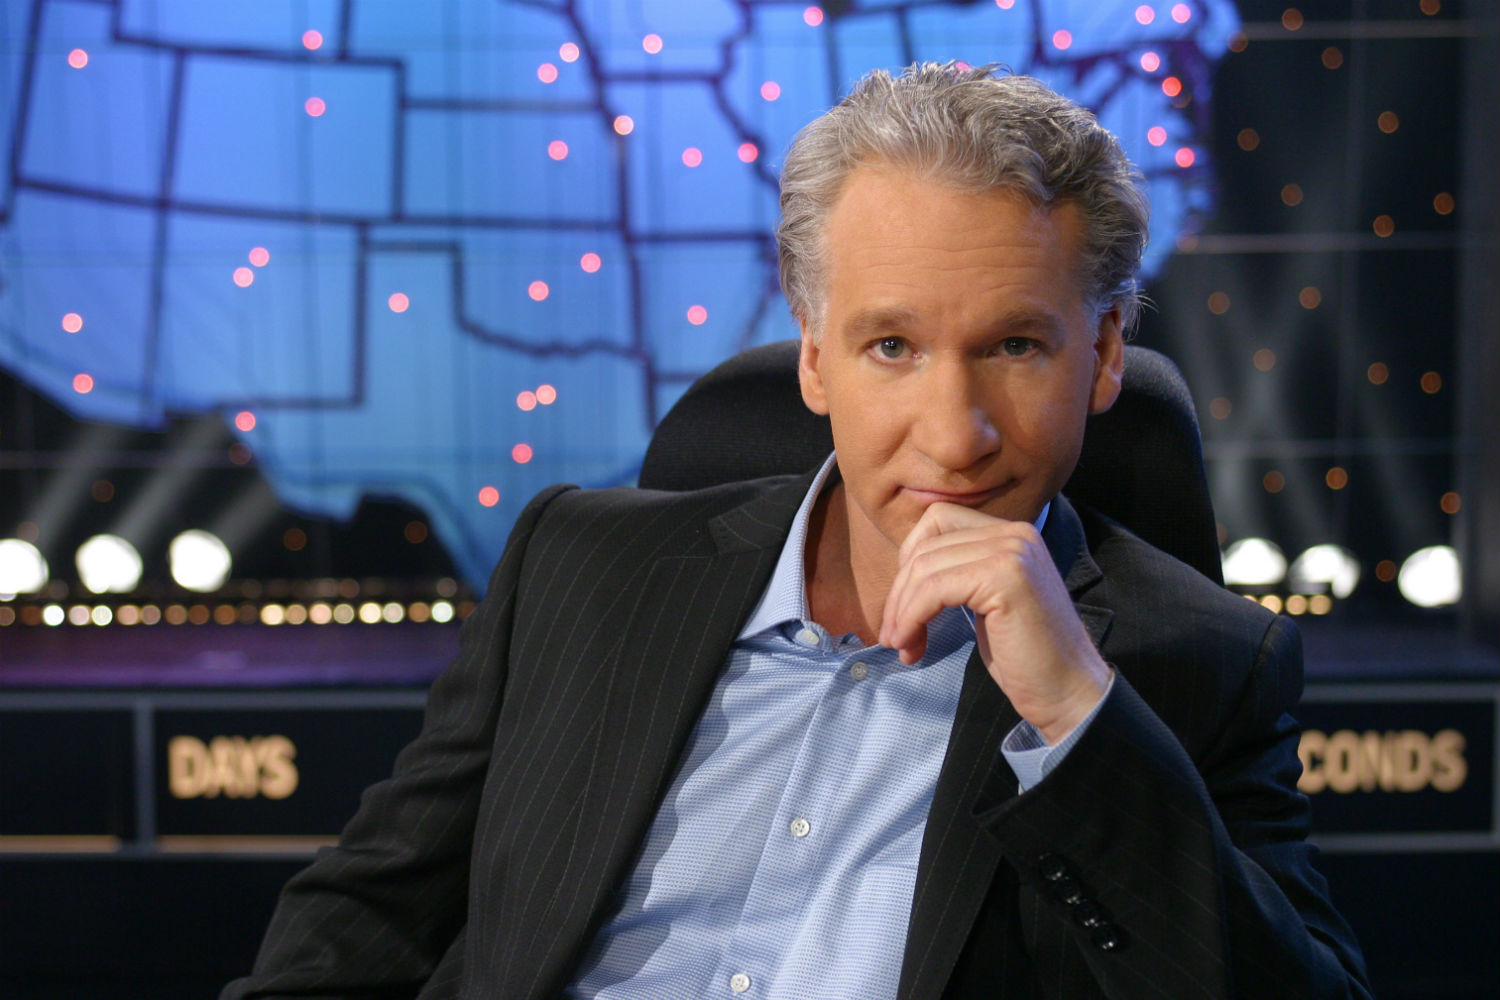 Did Bill Maher really get high before watching "Cosmos"? (Sam Jones)